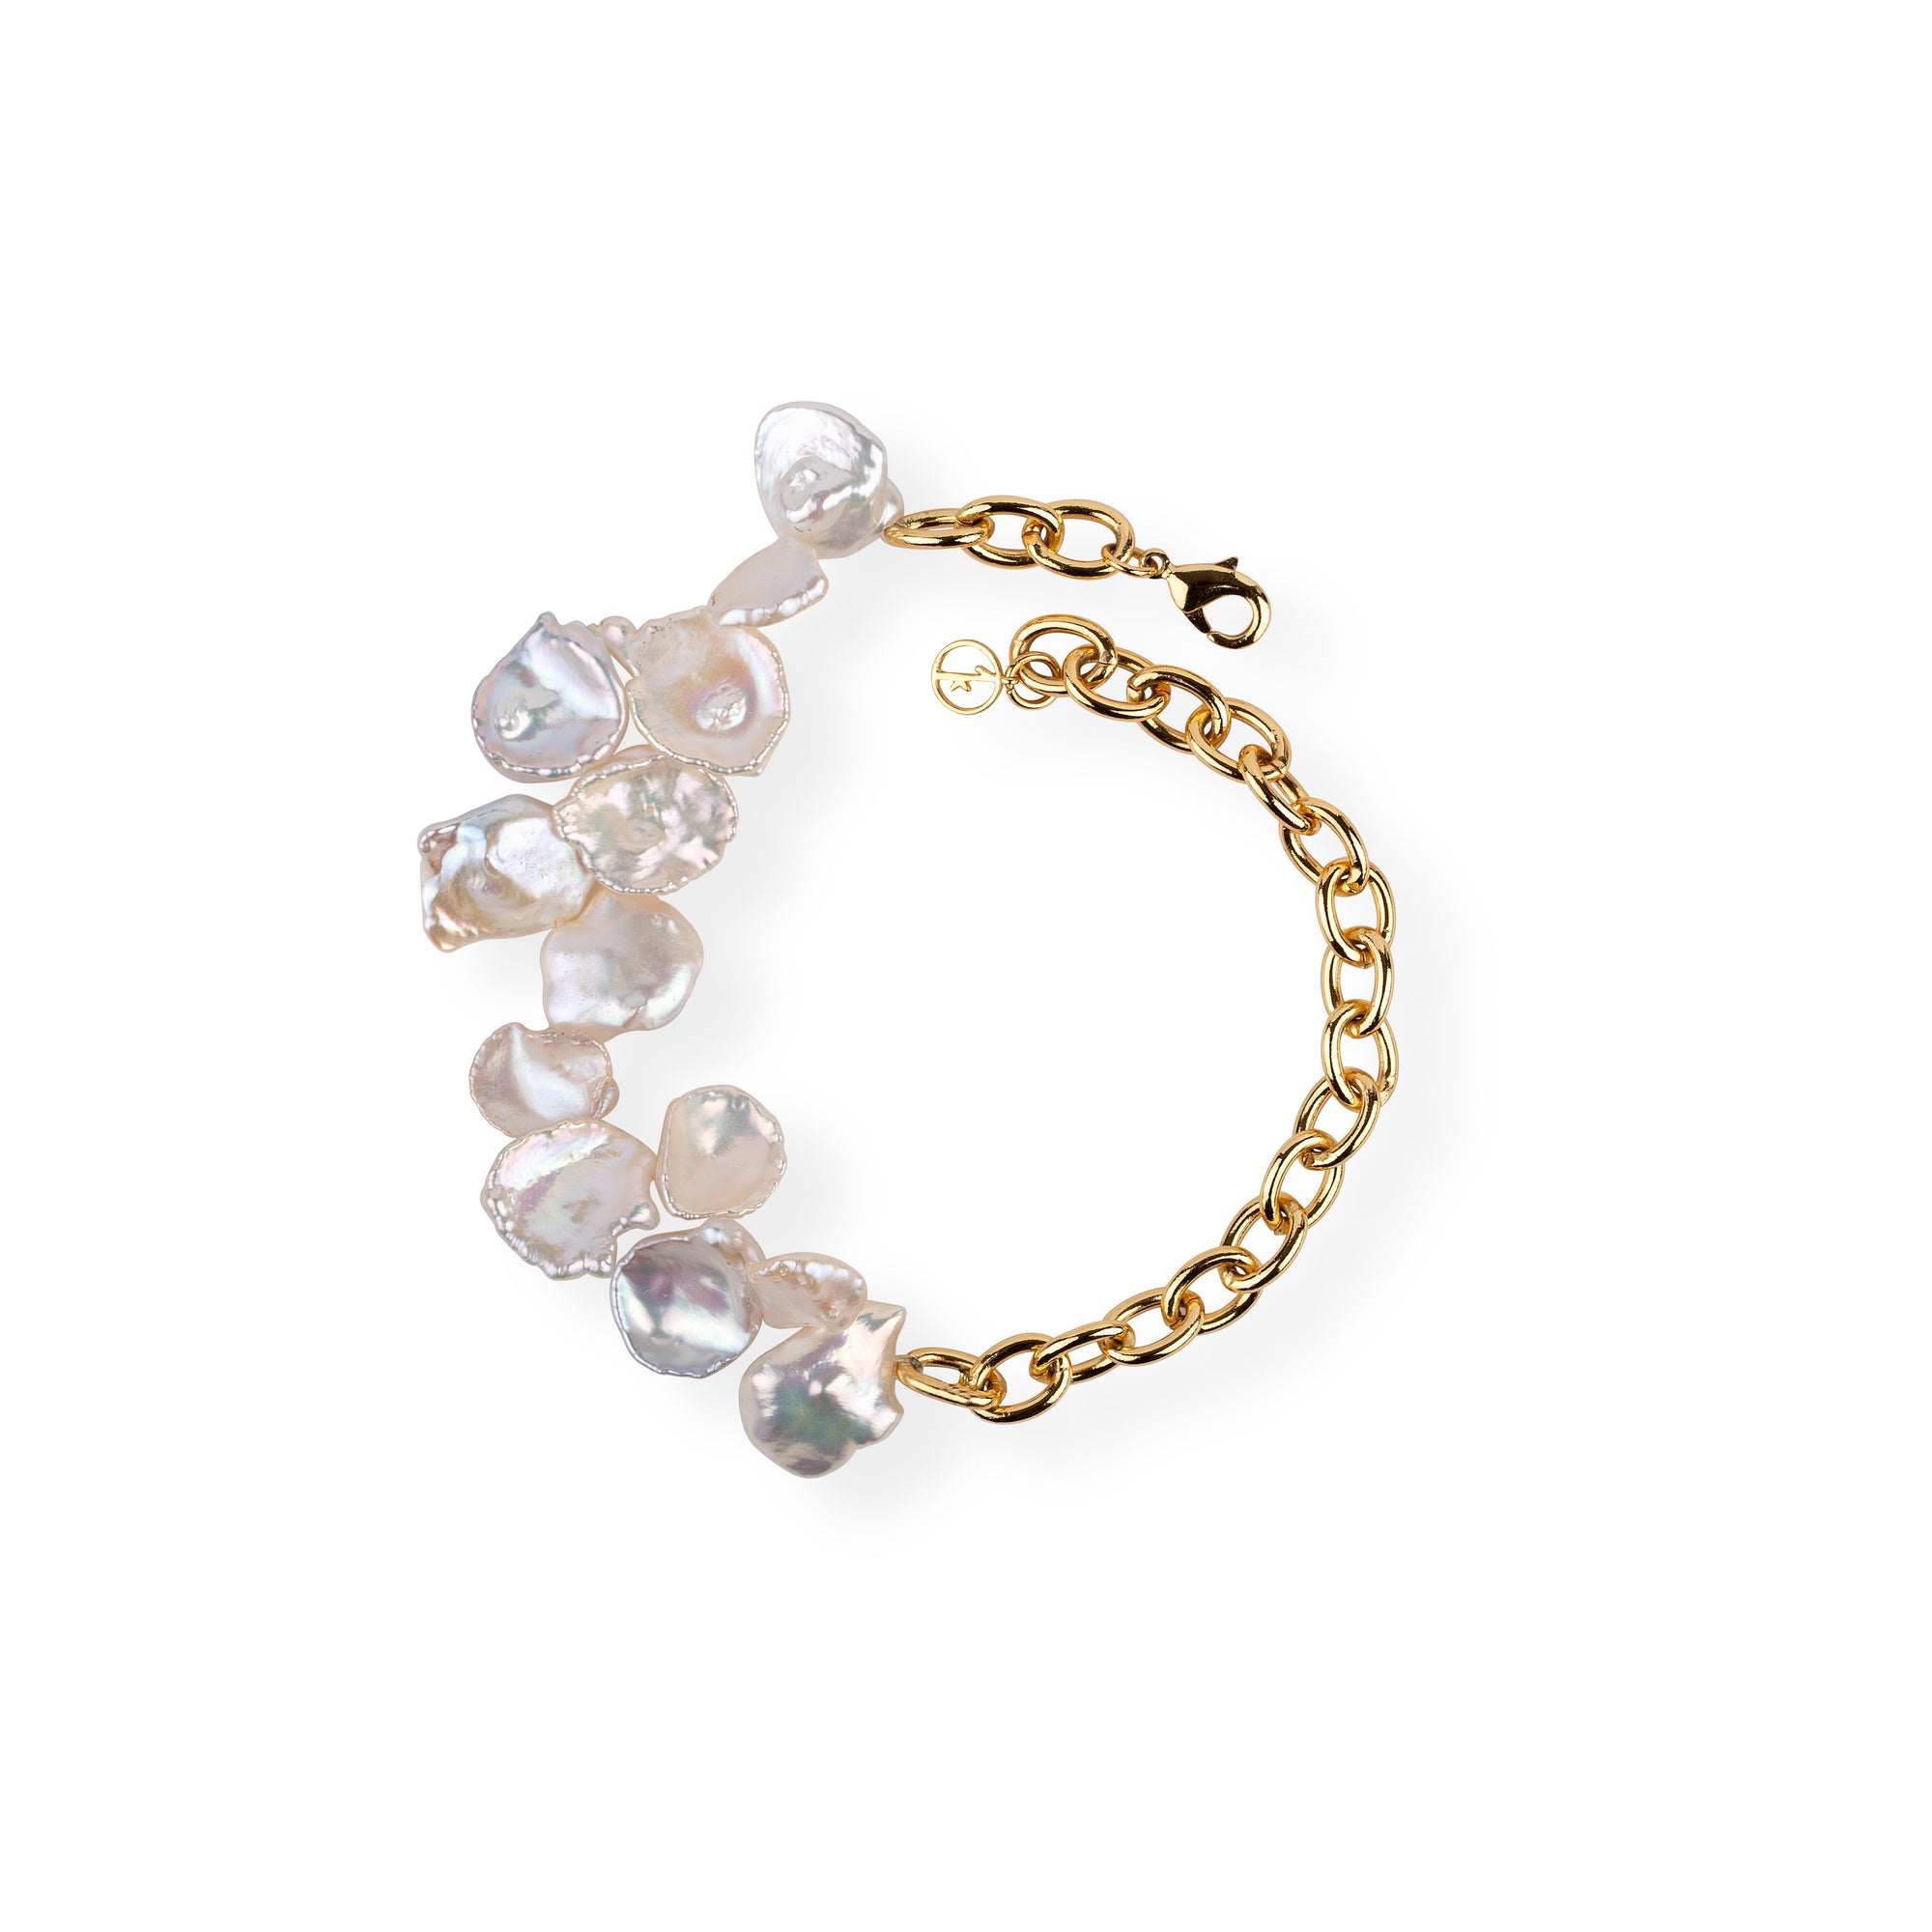 Two Faced Shelley Anklet/Armlet – Anissa Kermiche